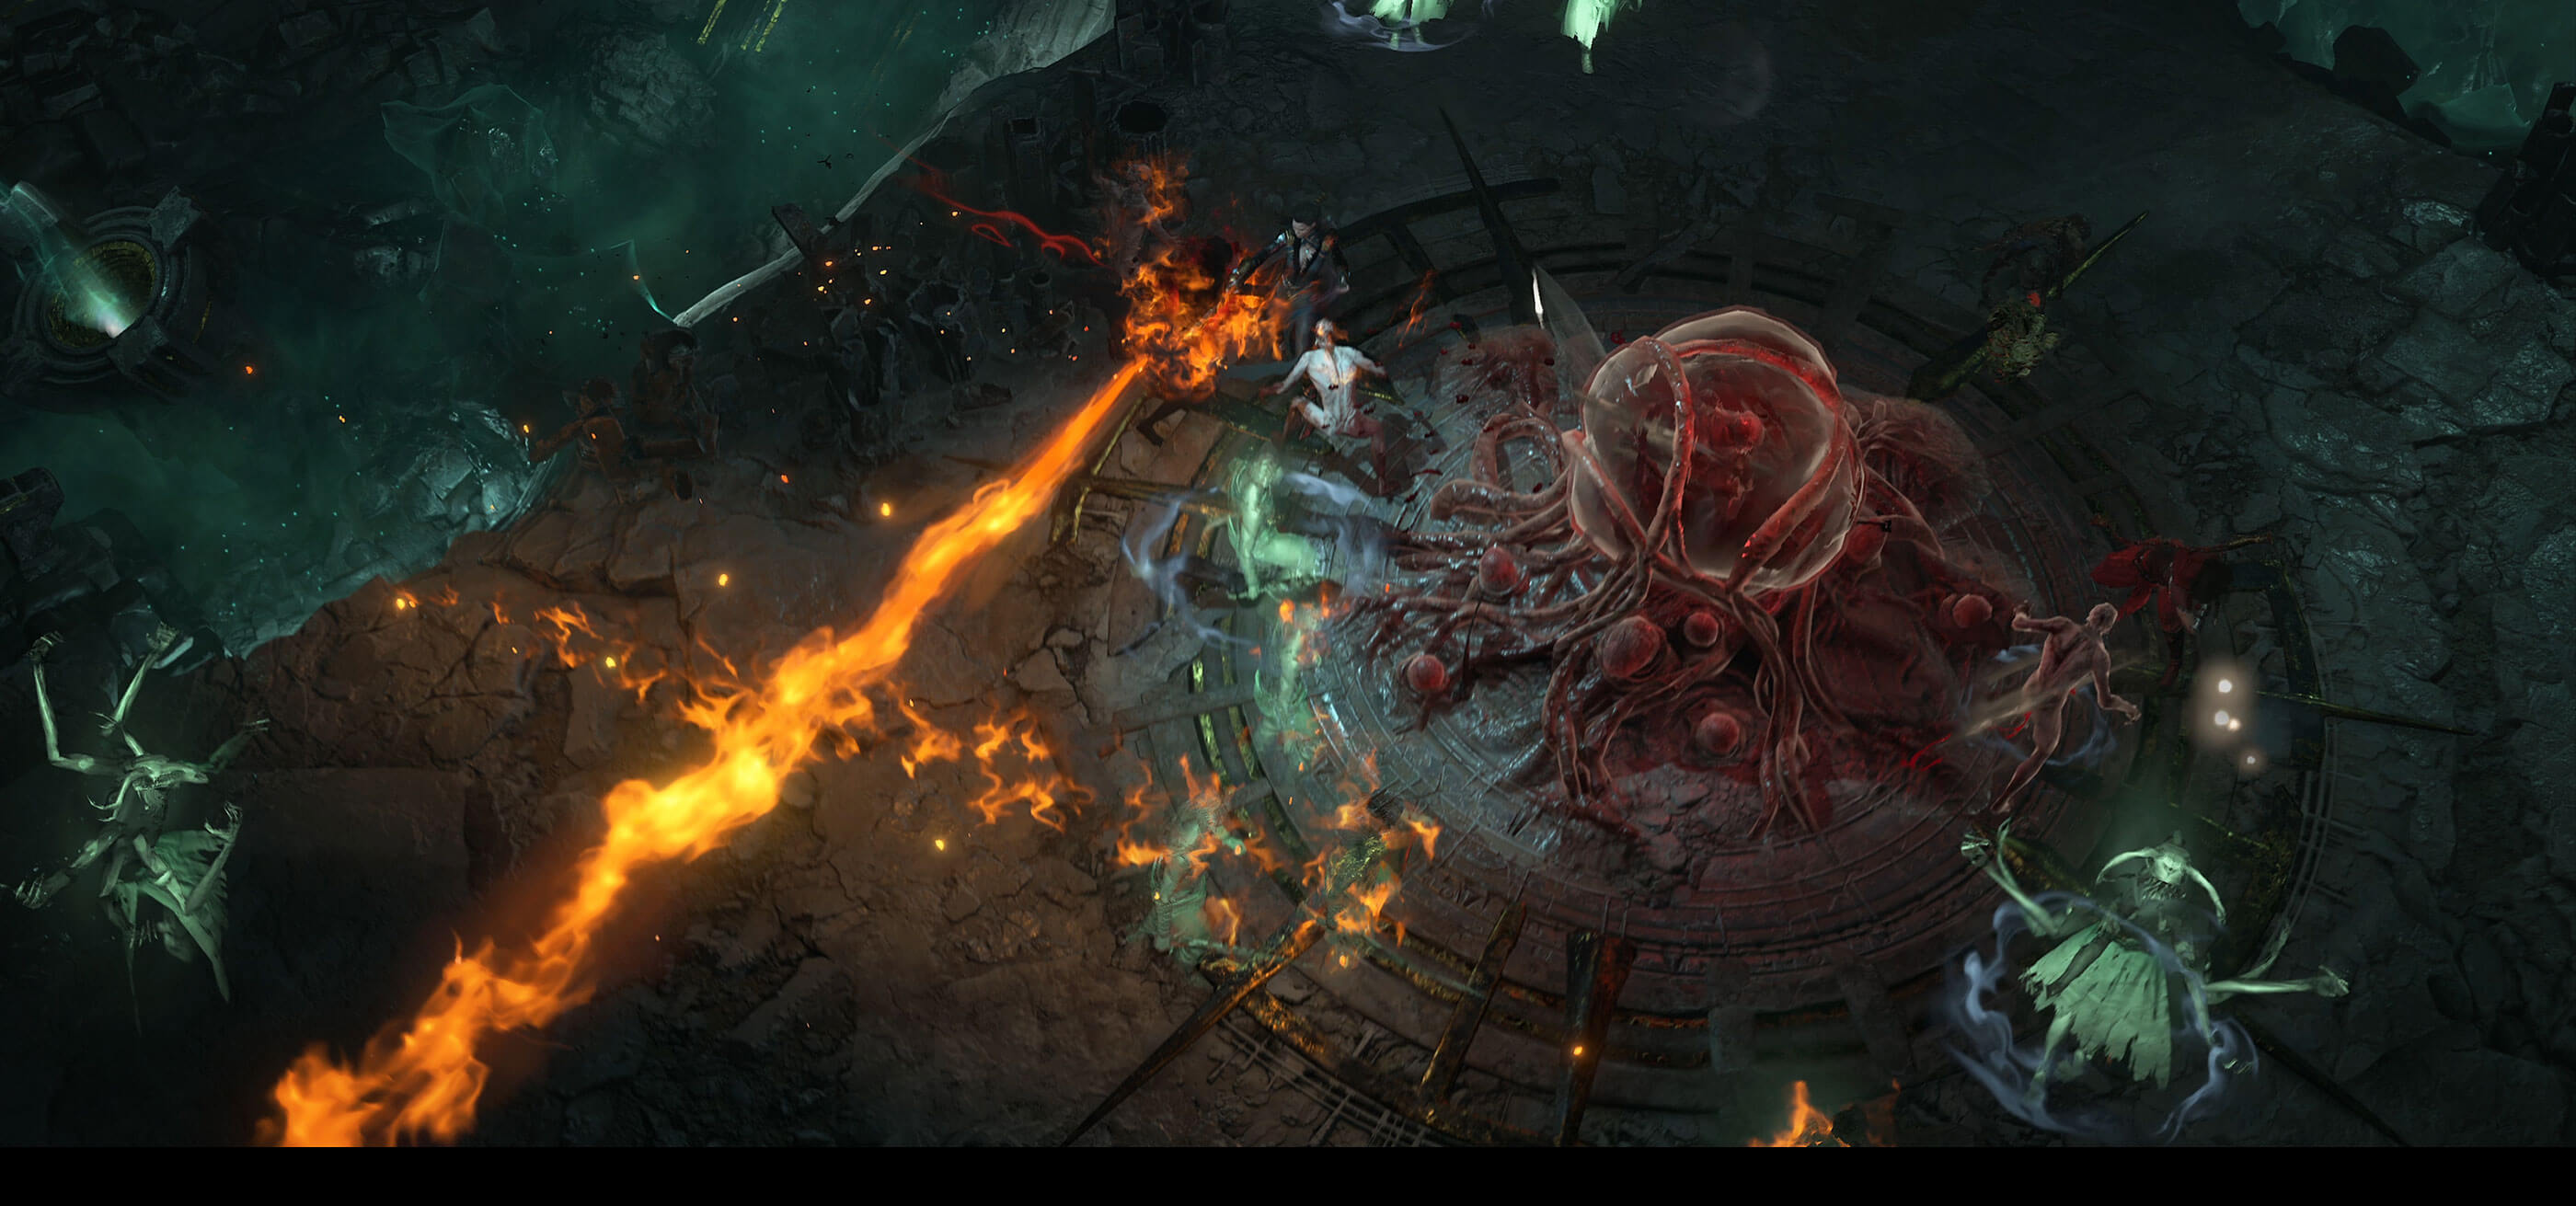 Flames erupt from a character’s hands as they fight demons near a gelatinous mass in a Diablo IV dungeon.